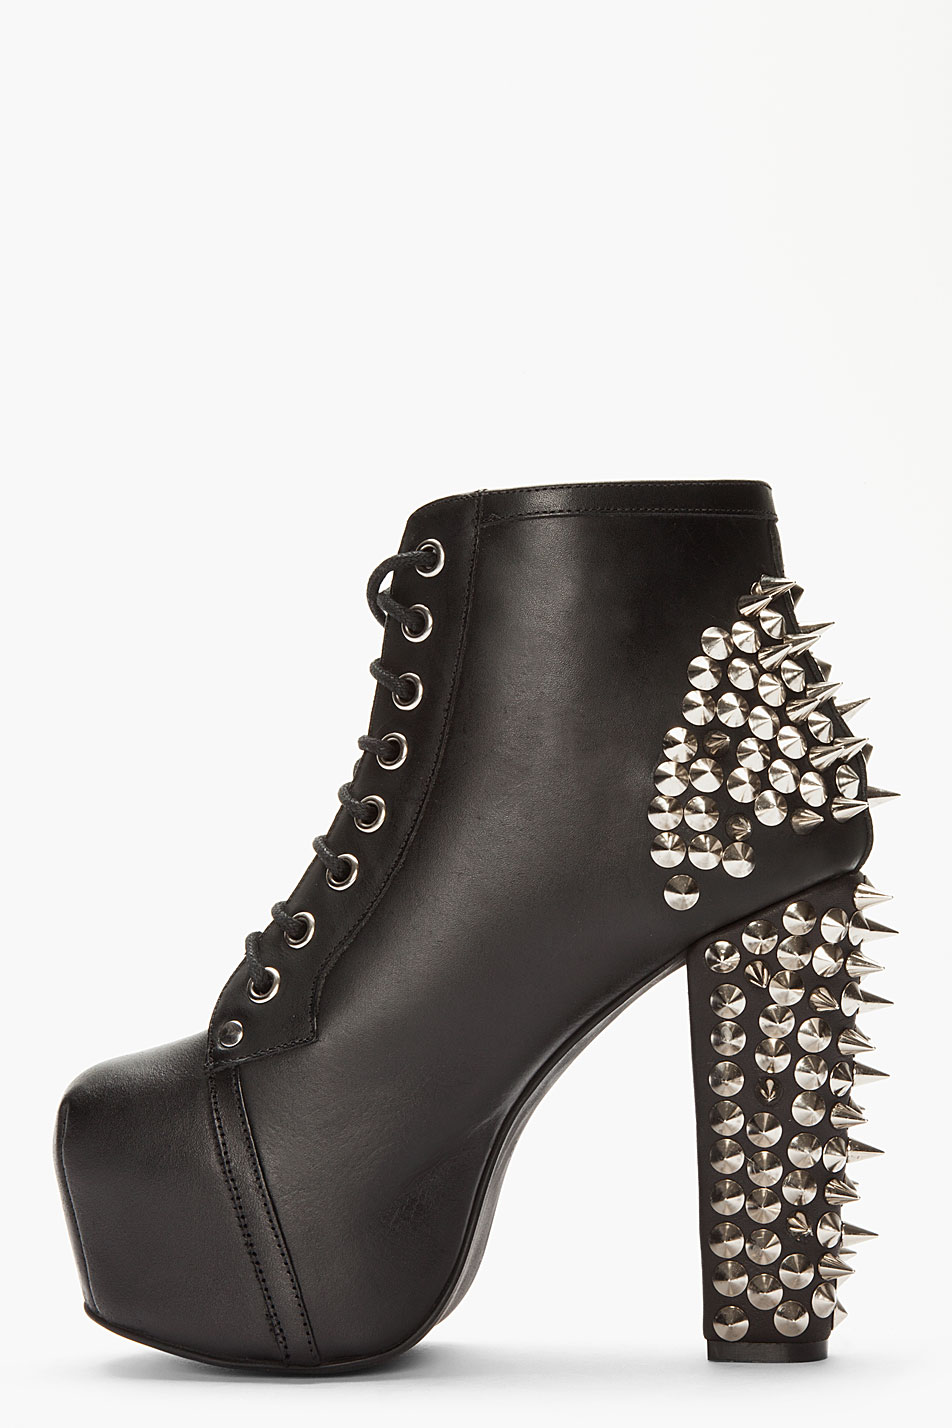 Jeffrey Campbell Black Leather Spiked Lita Boots - Lyst